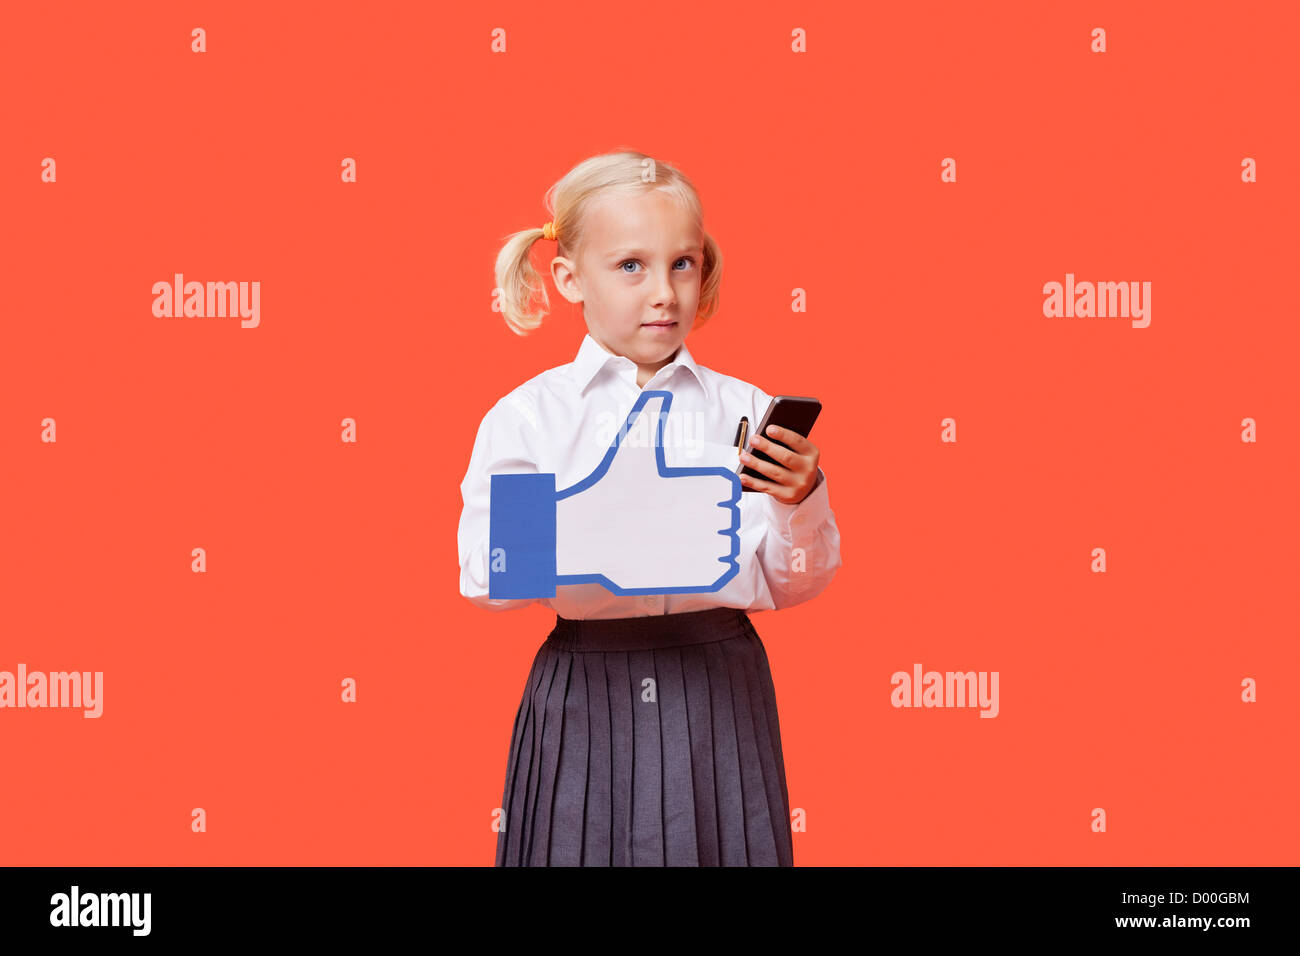 Portrait of a young schoolgirl with cell phone holding fake like button over orange background Stock Photo